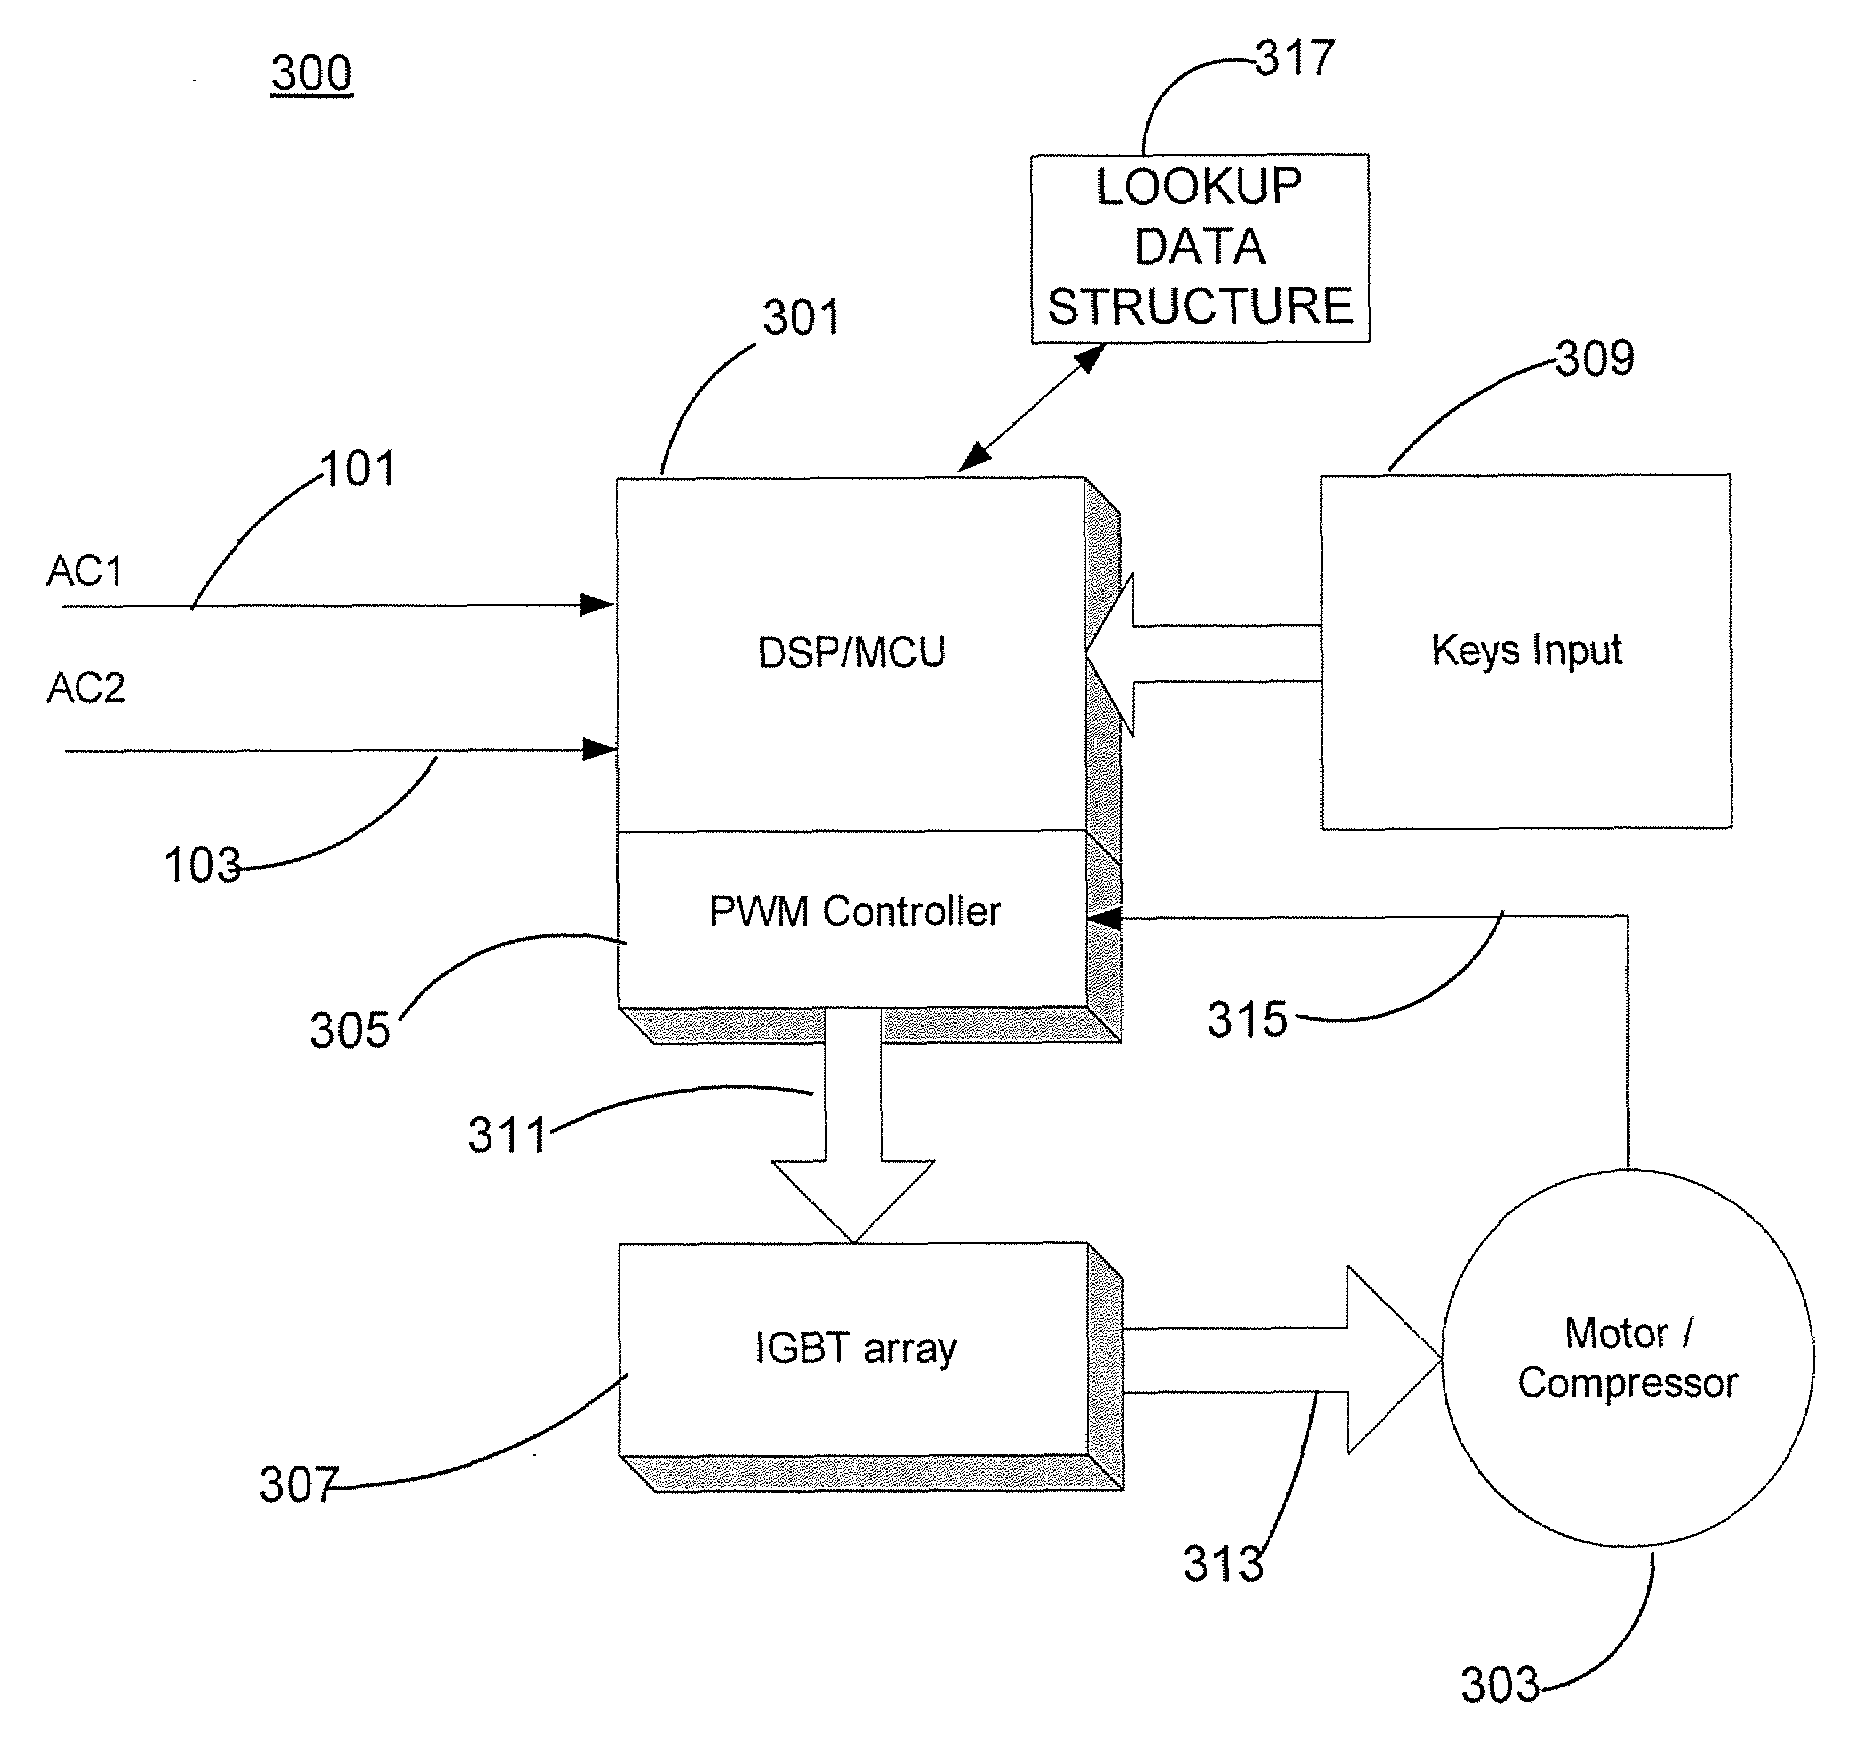 Conveying Temperature Information in a Controlled Variable Speed Heating, Ventilation, and Air Conditioning (HVAC) System